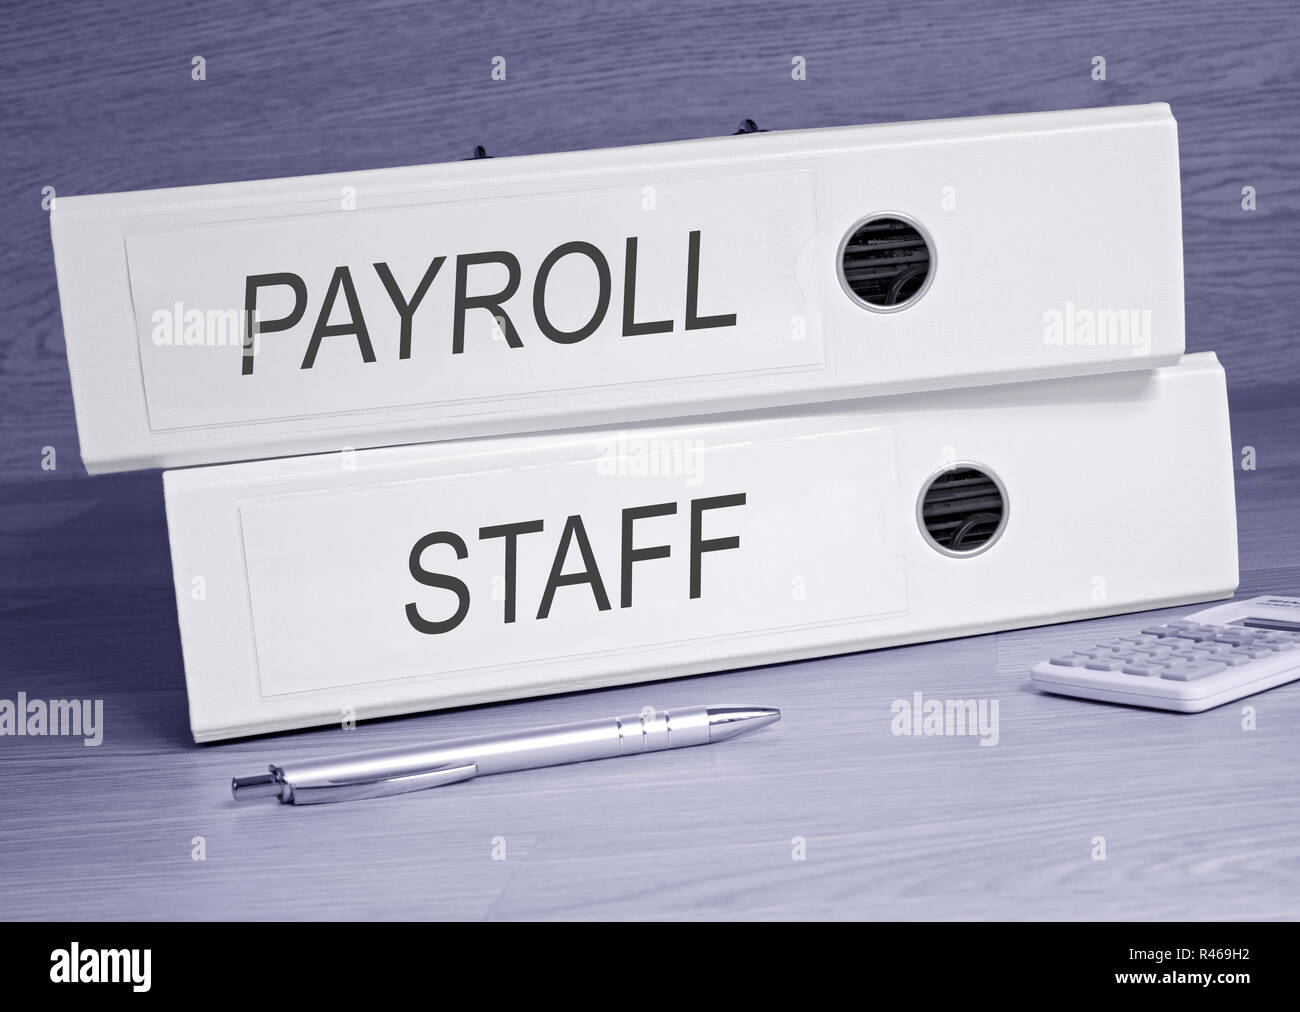 Payroll and Staff - two binders in the office Stock Photo